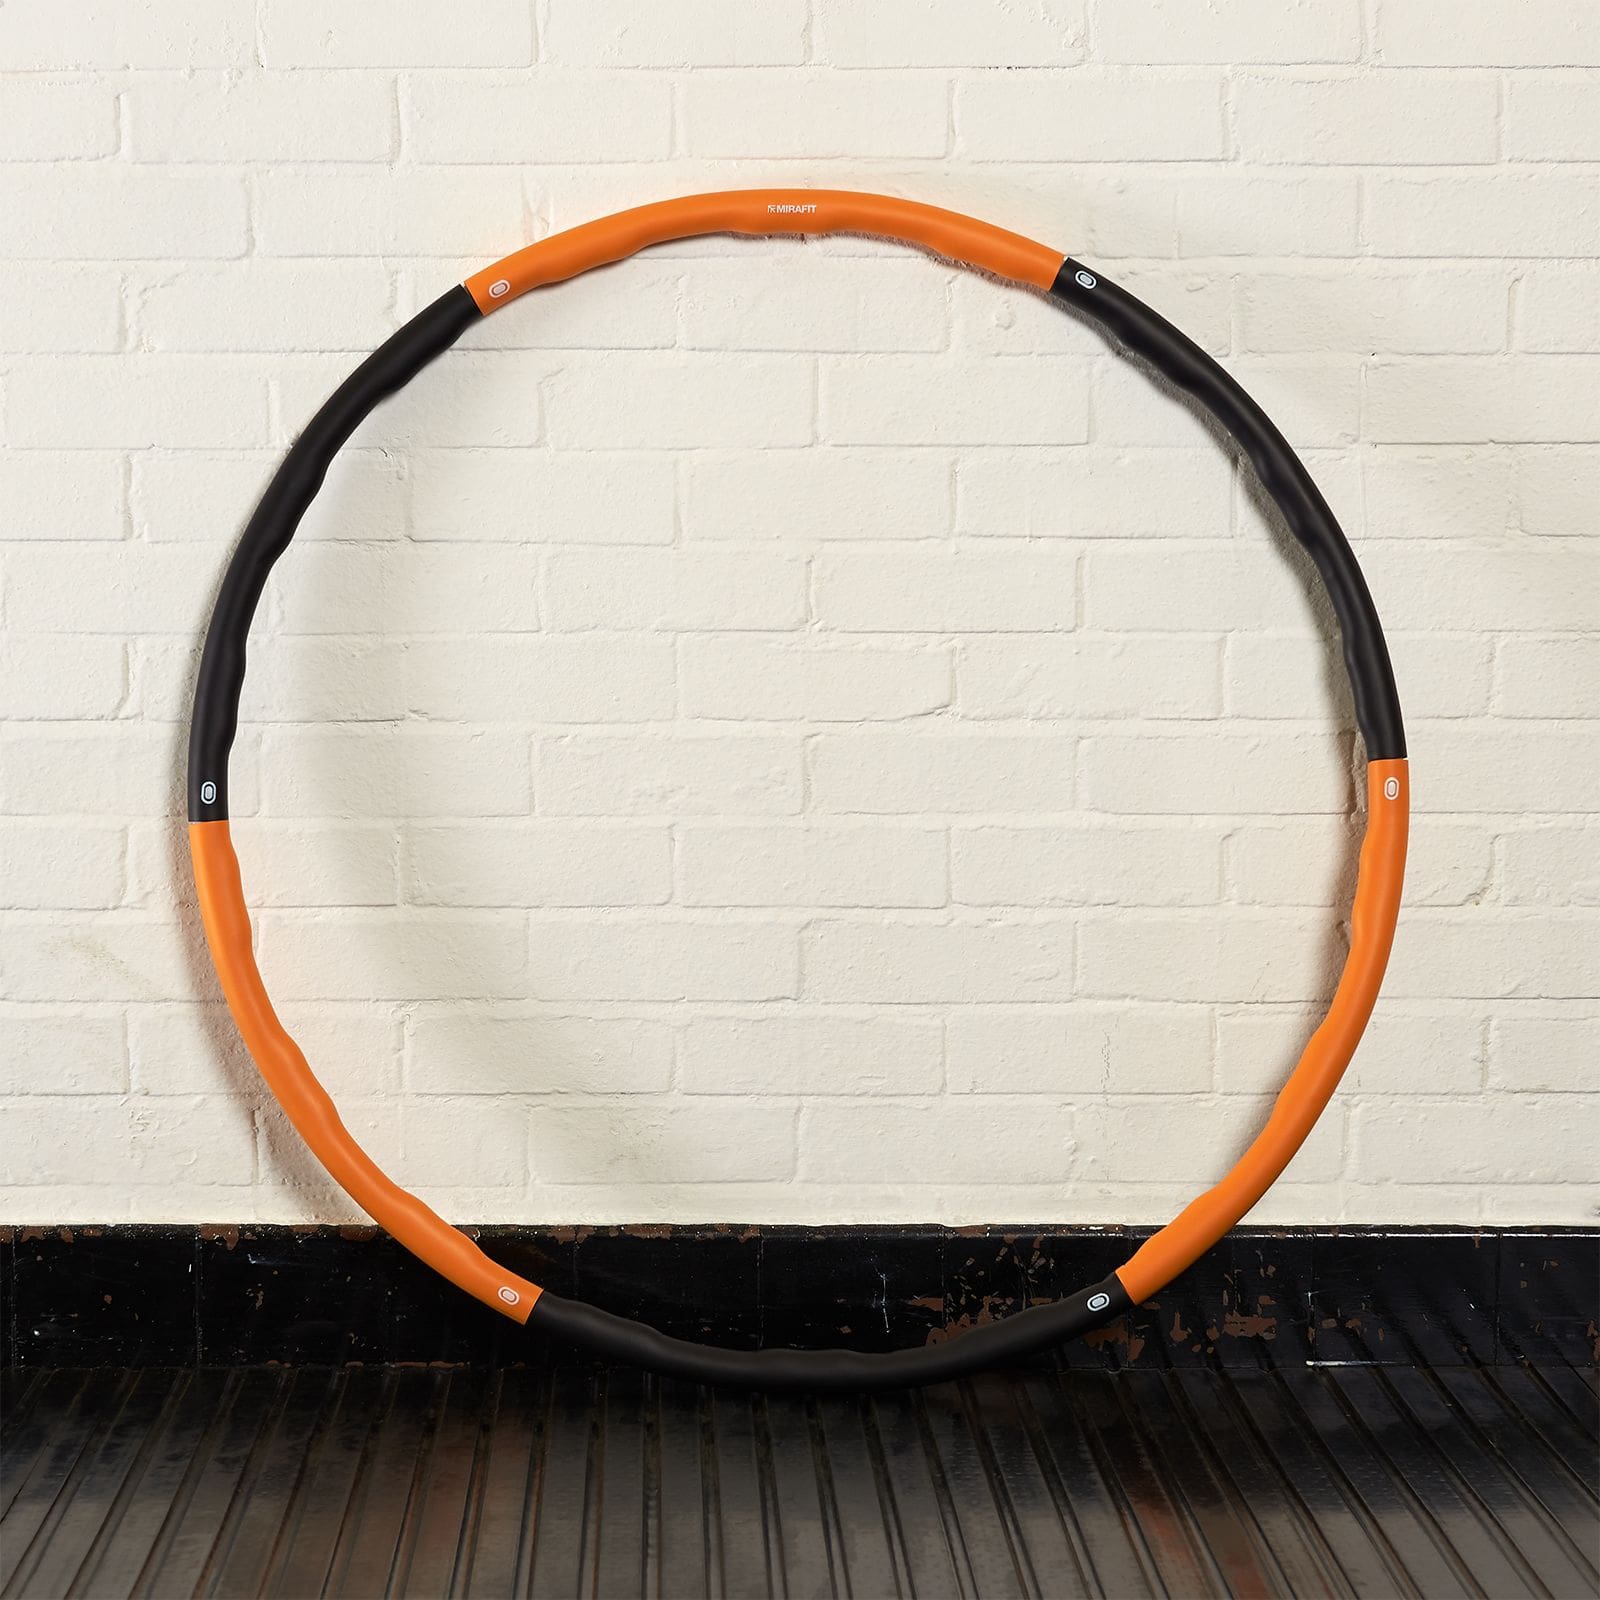 Mirafit Weighted Hoop Review